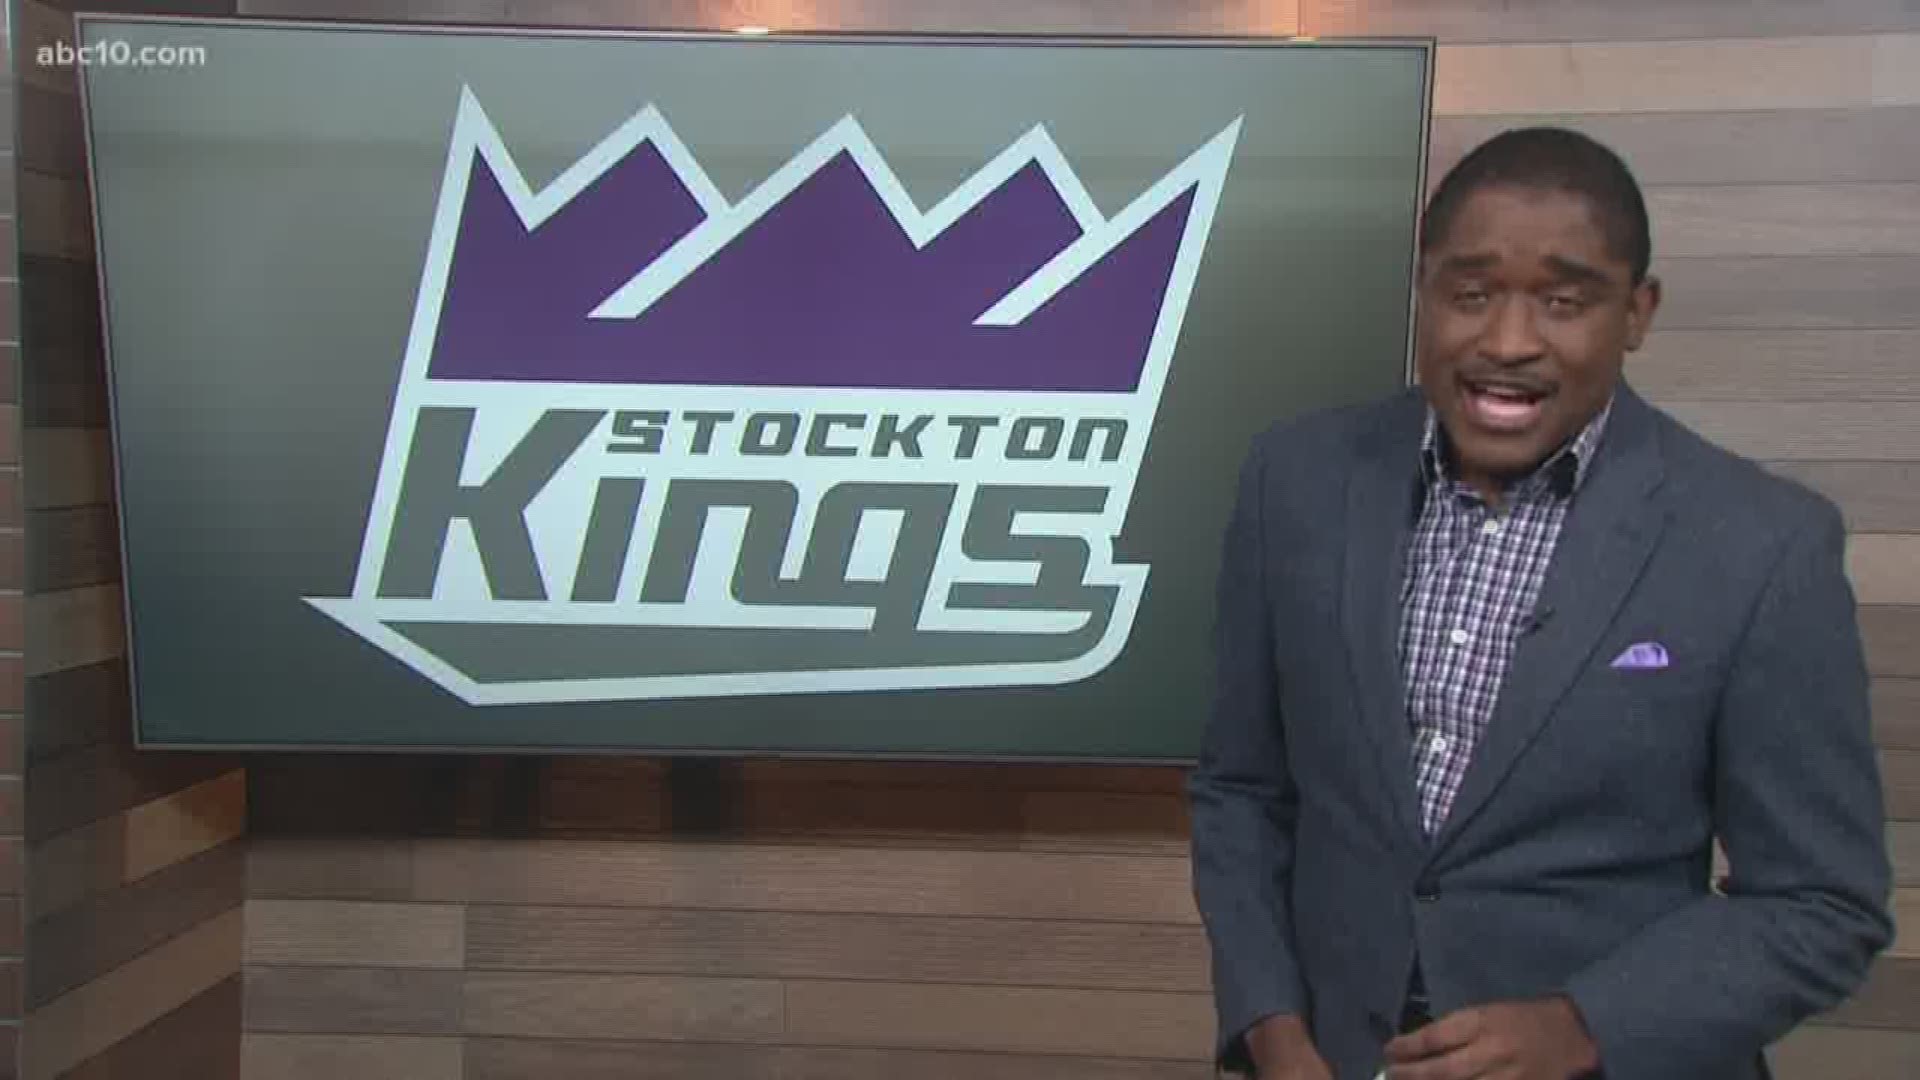 The Stockton Kings partnered with Stagg High School to open “Kings Closet” on the school’s campus. The purpose of the program is to provide students with the bear necessities like clothes and hygiene products.